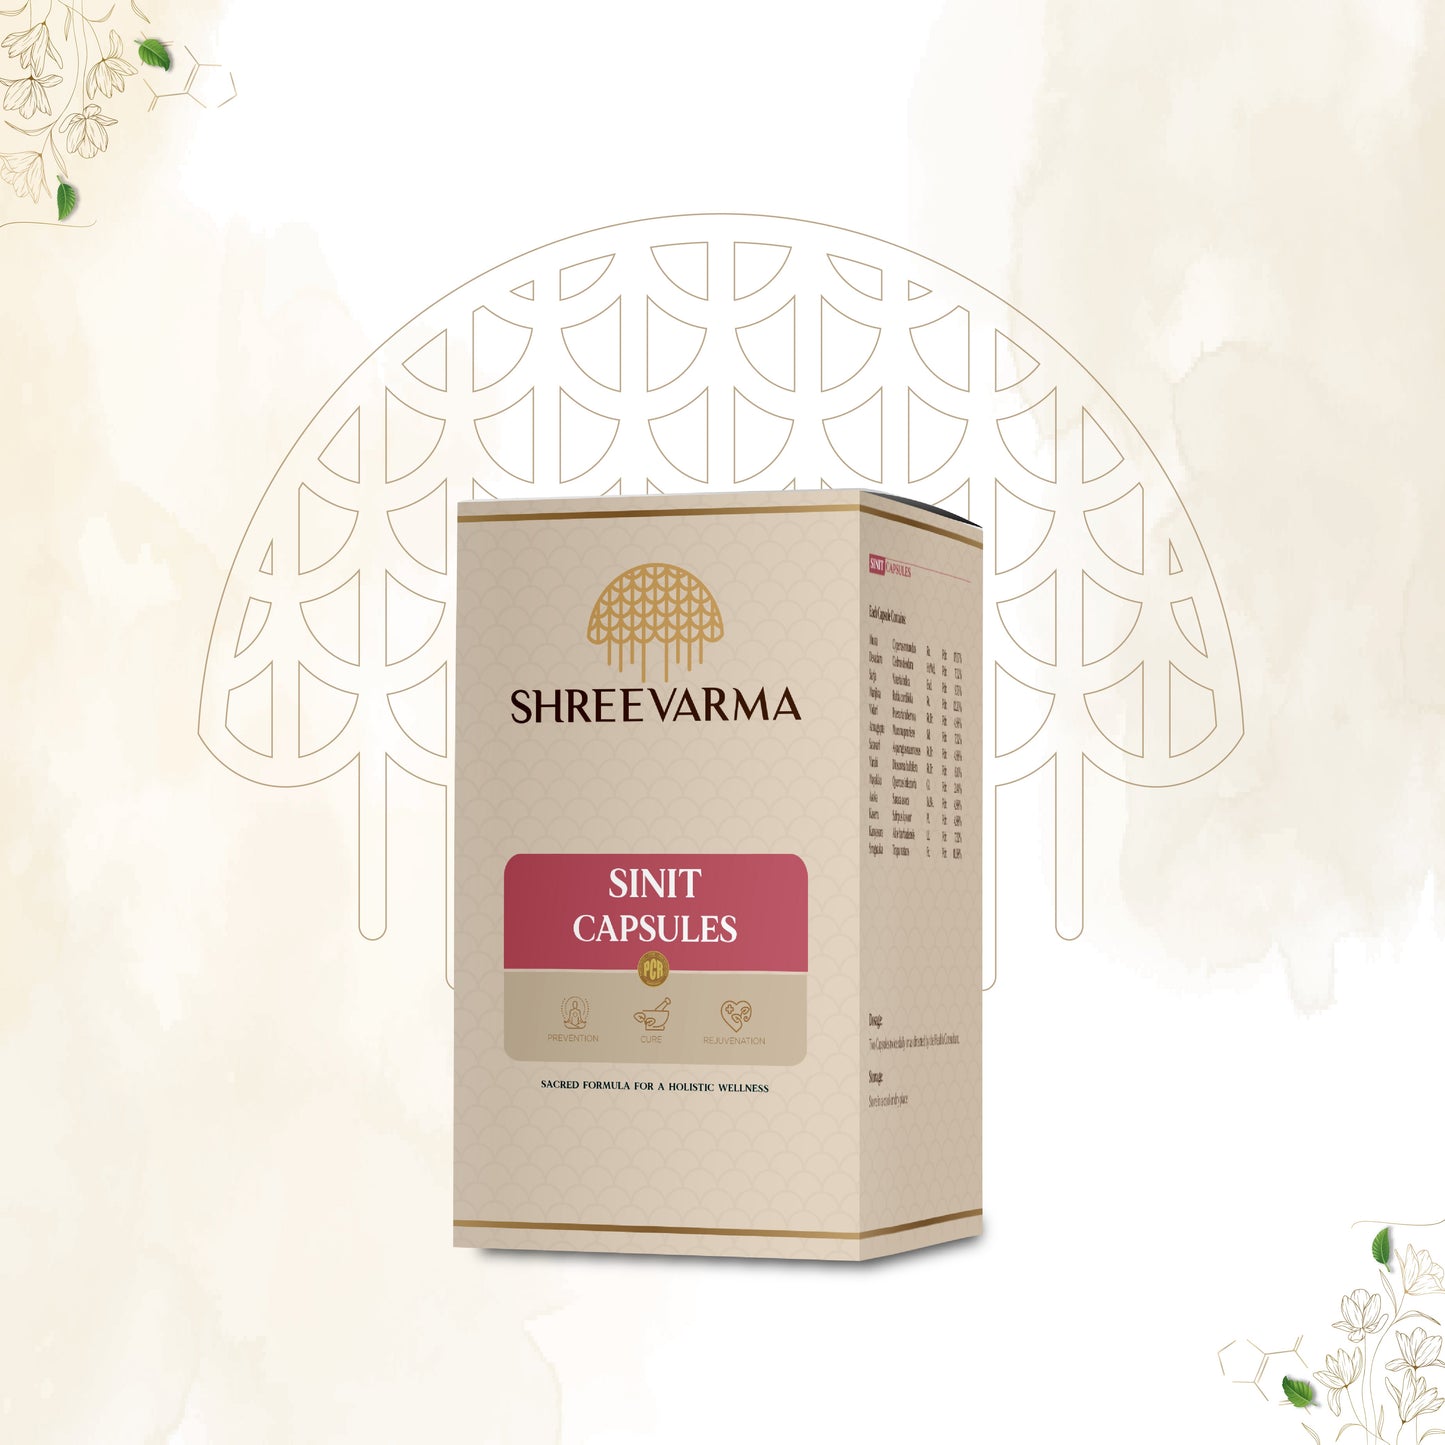 shreevarma Capsule Sinit Capsules for Treating Sinus | Ayurvedic Supplement for Clear Breathing and Ease Nasal Congestion | Boosts Immunity | Soothes Sore Throat and Relieves Sinusitis | Clove | Tulasi – 60 Capsules